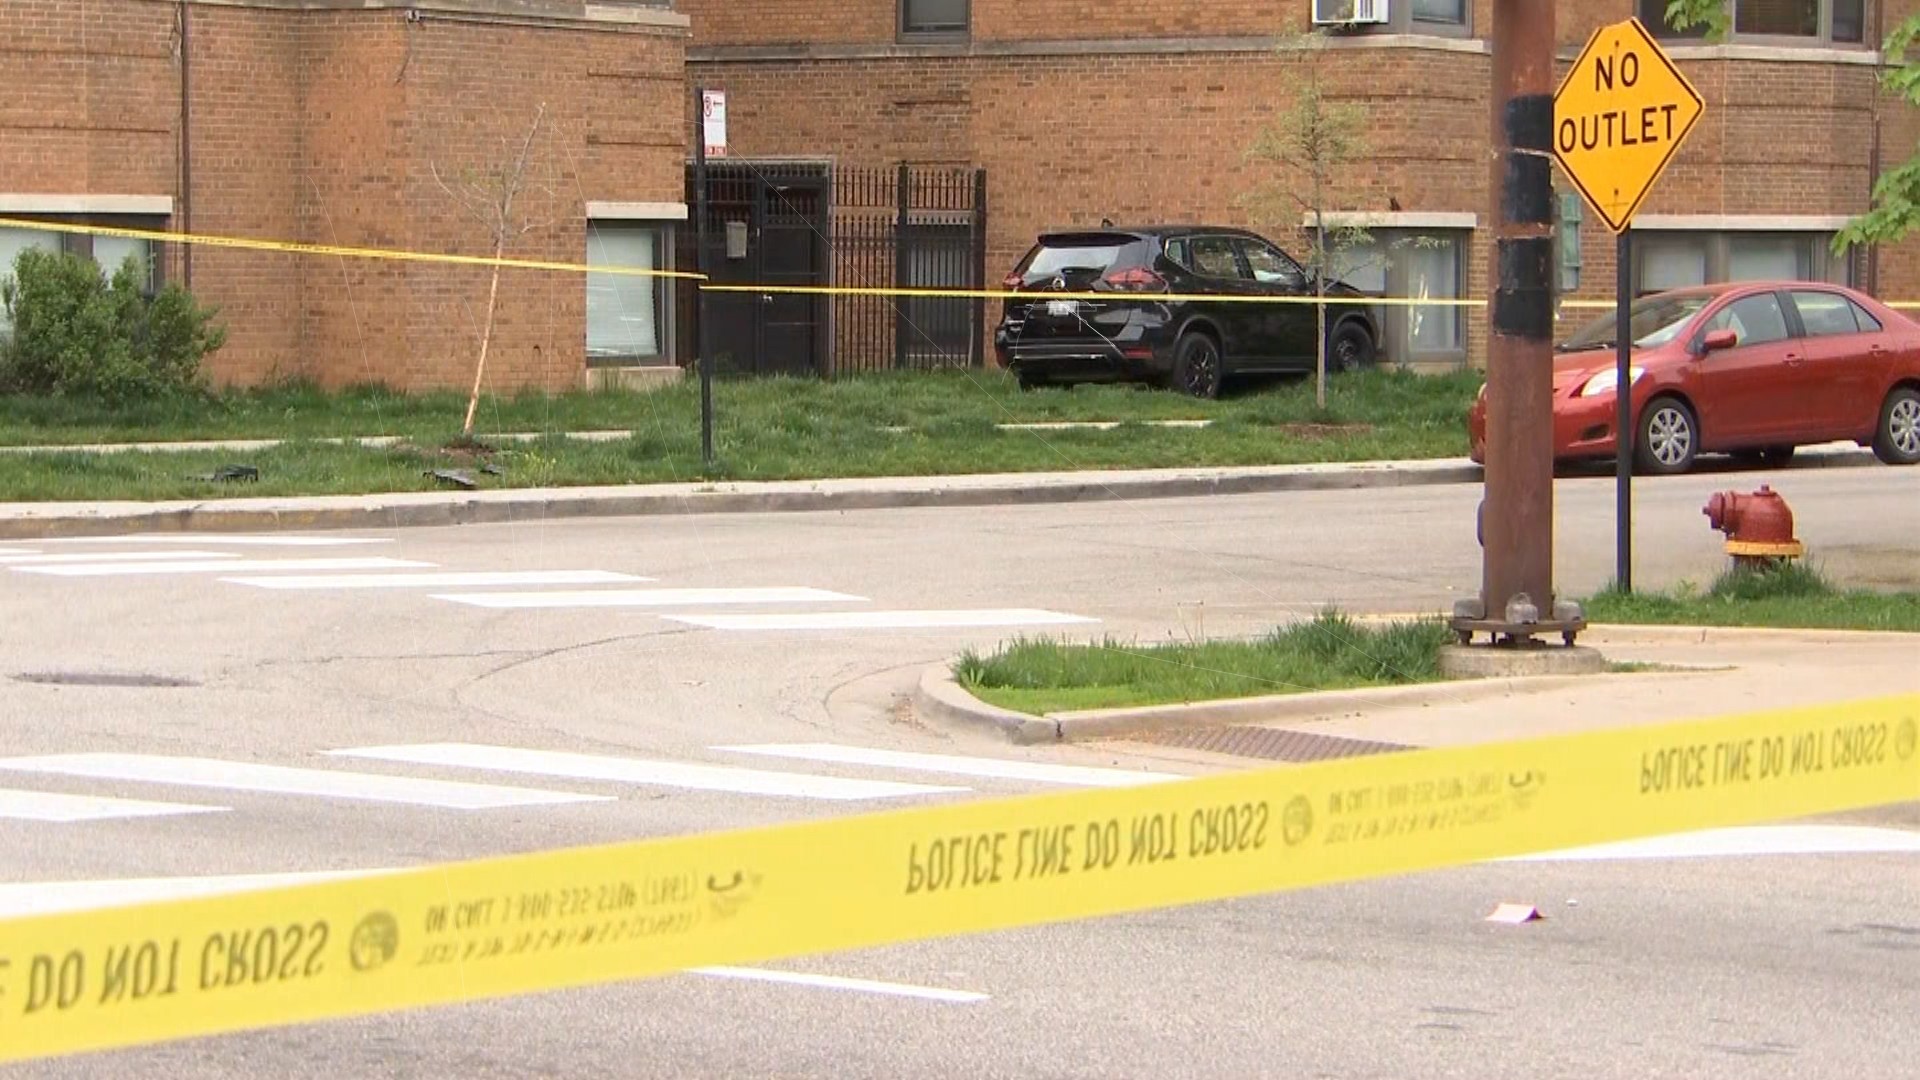 Driver Recounts Ordeal After Assailant Fired Shots at Him in Rogers Park – NBC Chicago